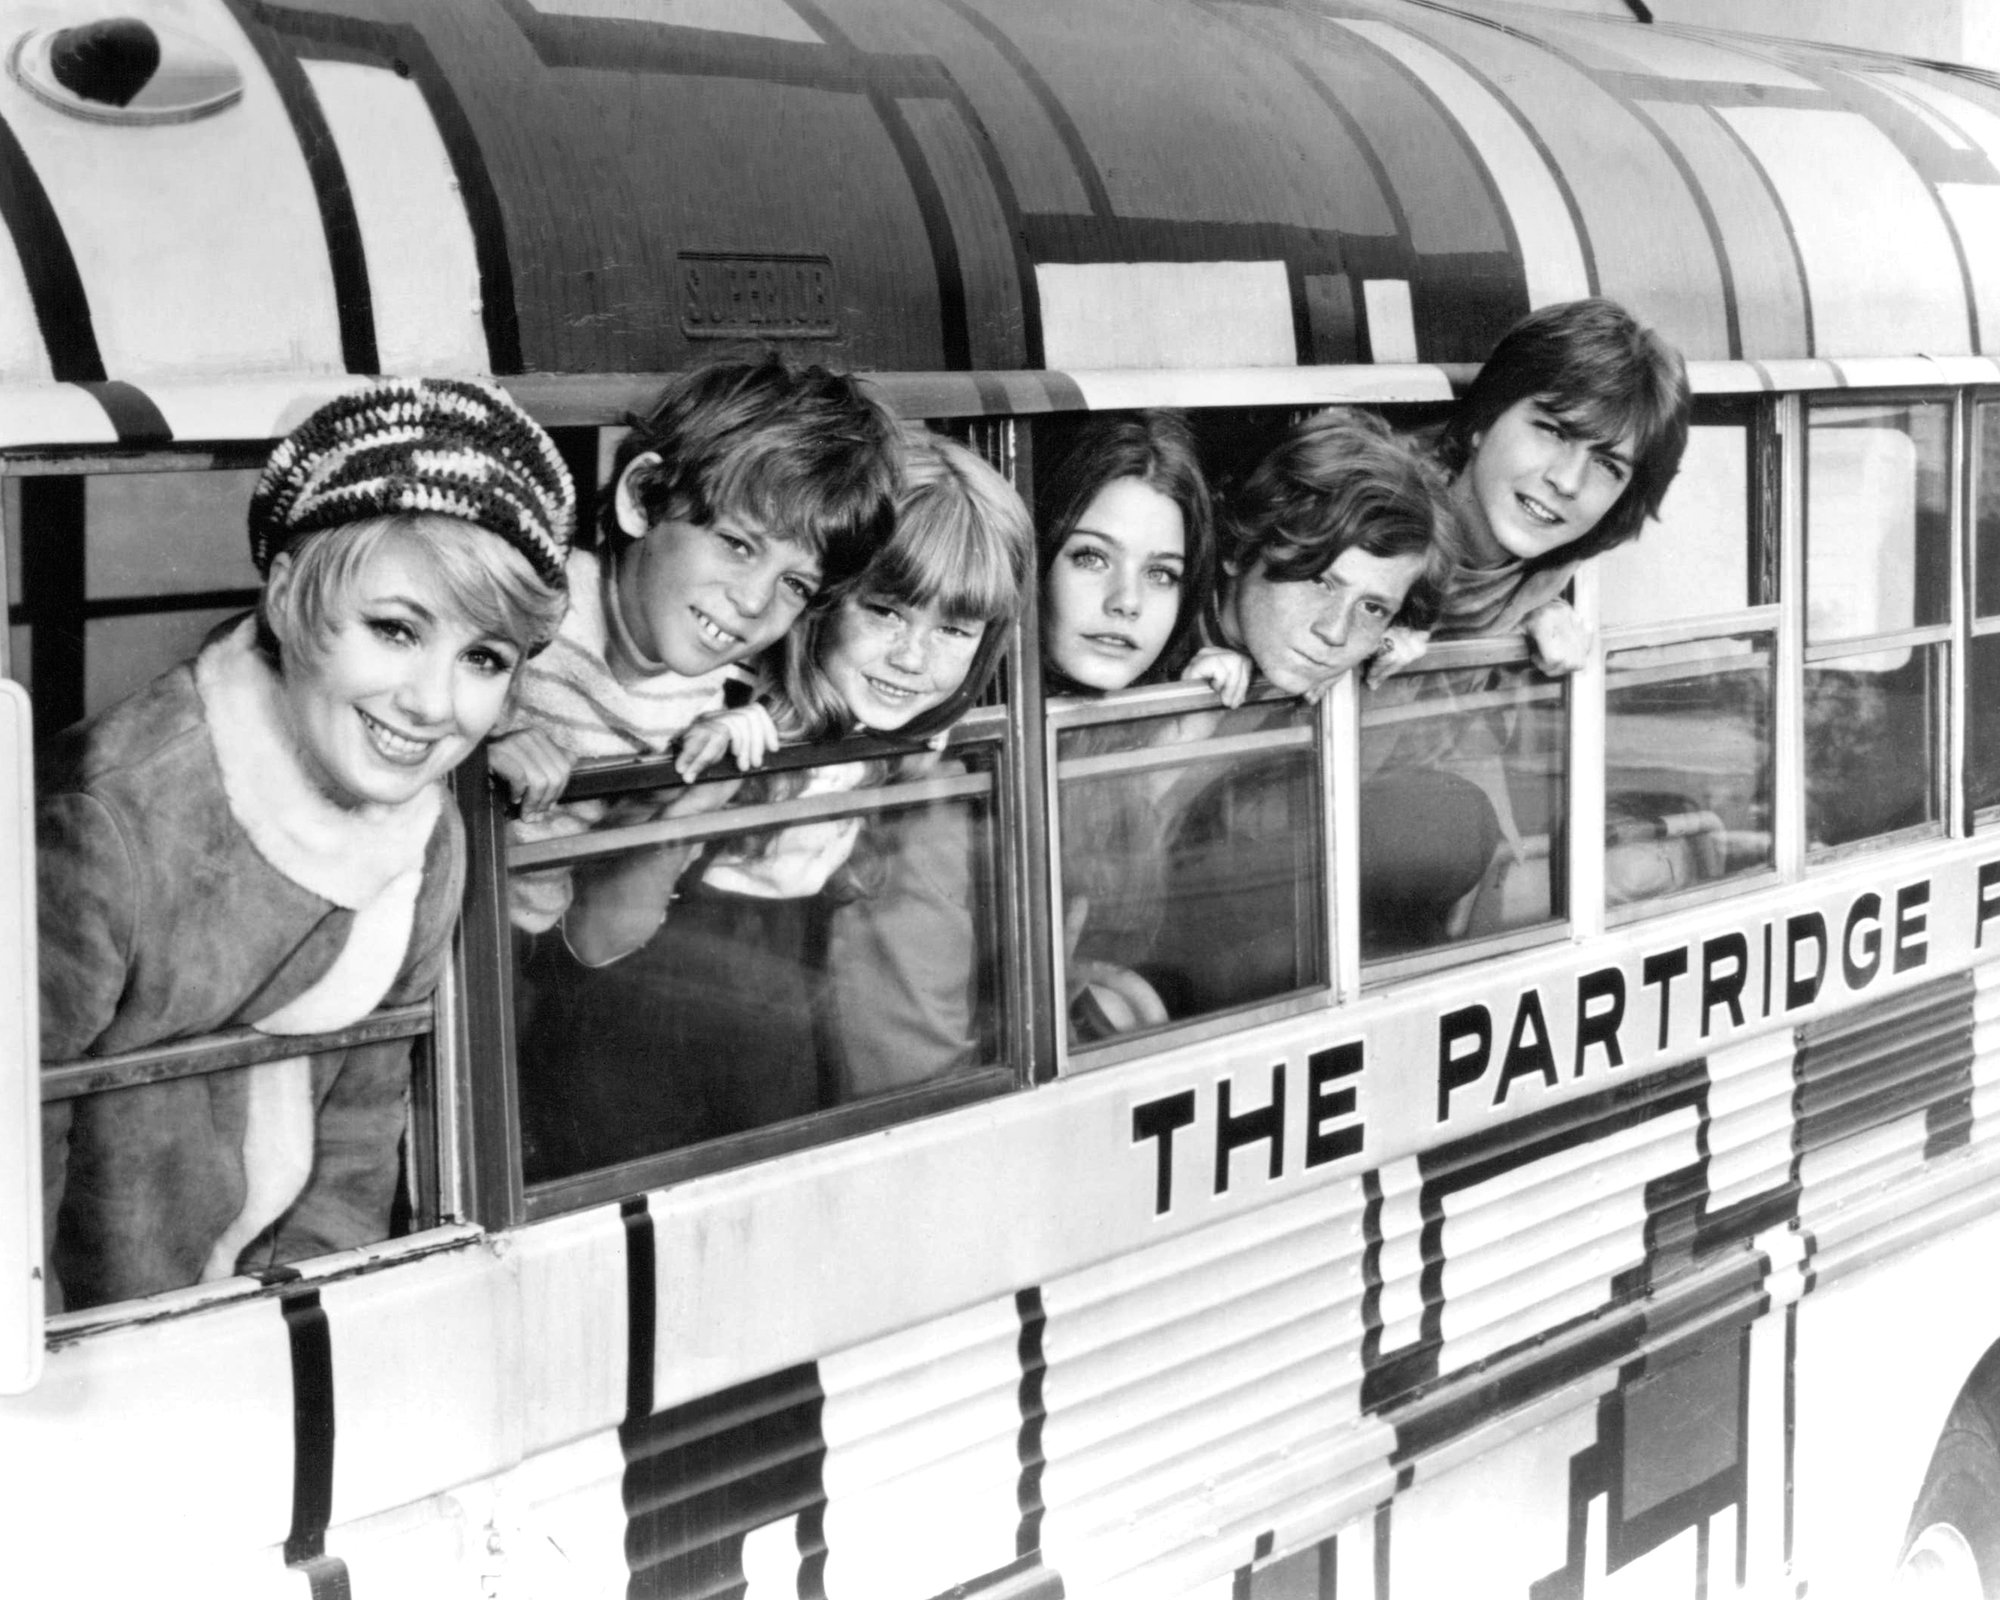 (L-R) Shirley Jones, Jeremy Gelbwaks, Suzanne Crough, Susan Dey, Danny Bonaduce and David Cassidy leaning out of schoolbus windows, in black and white